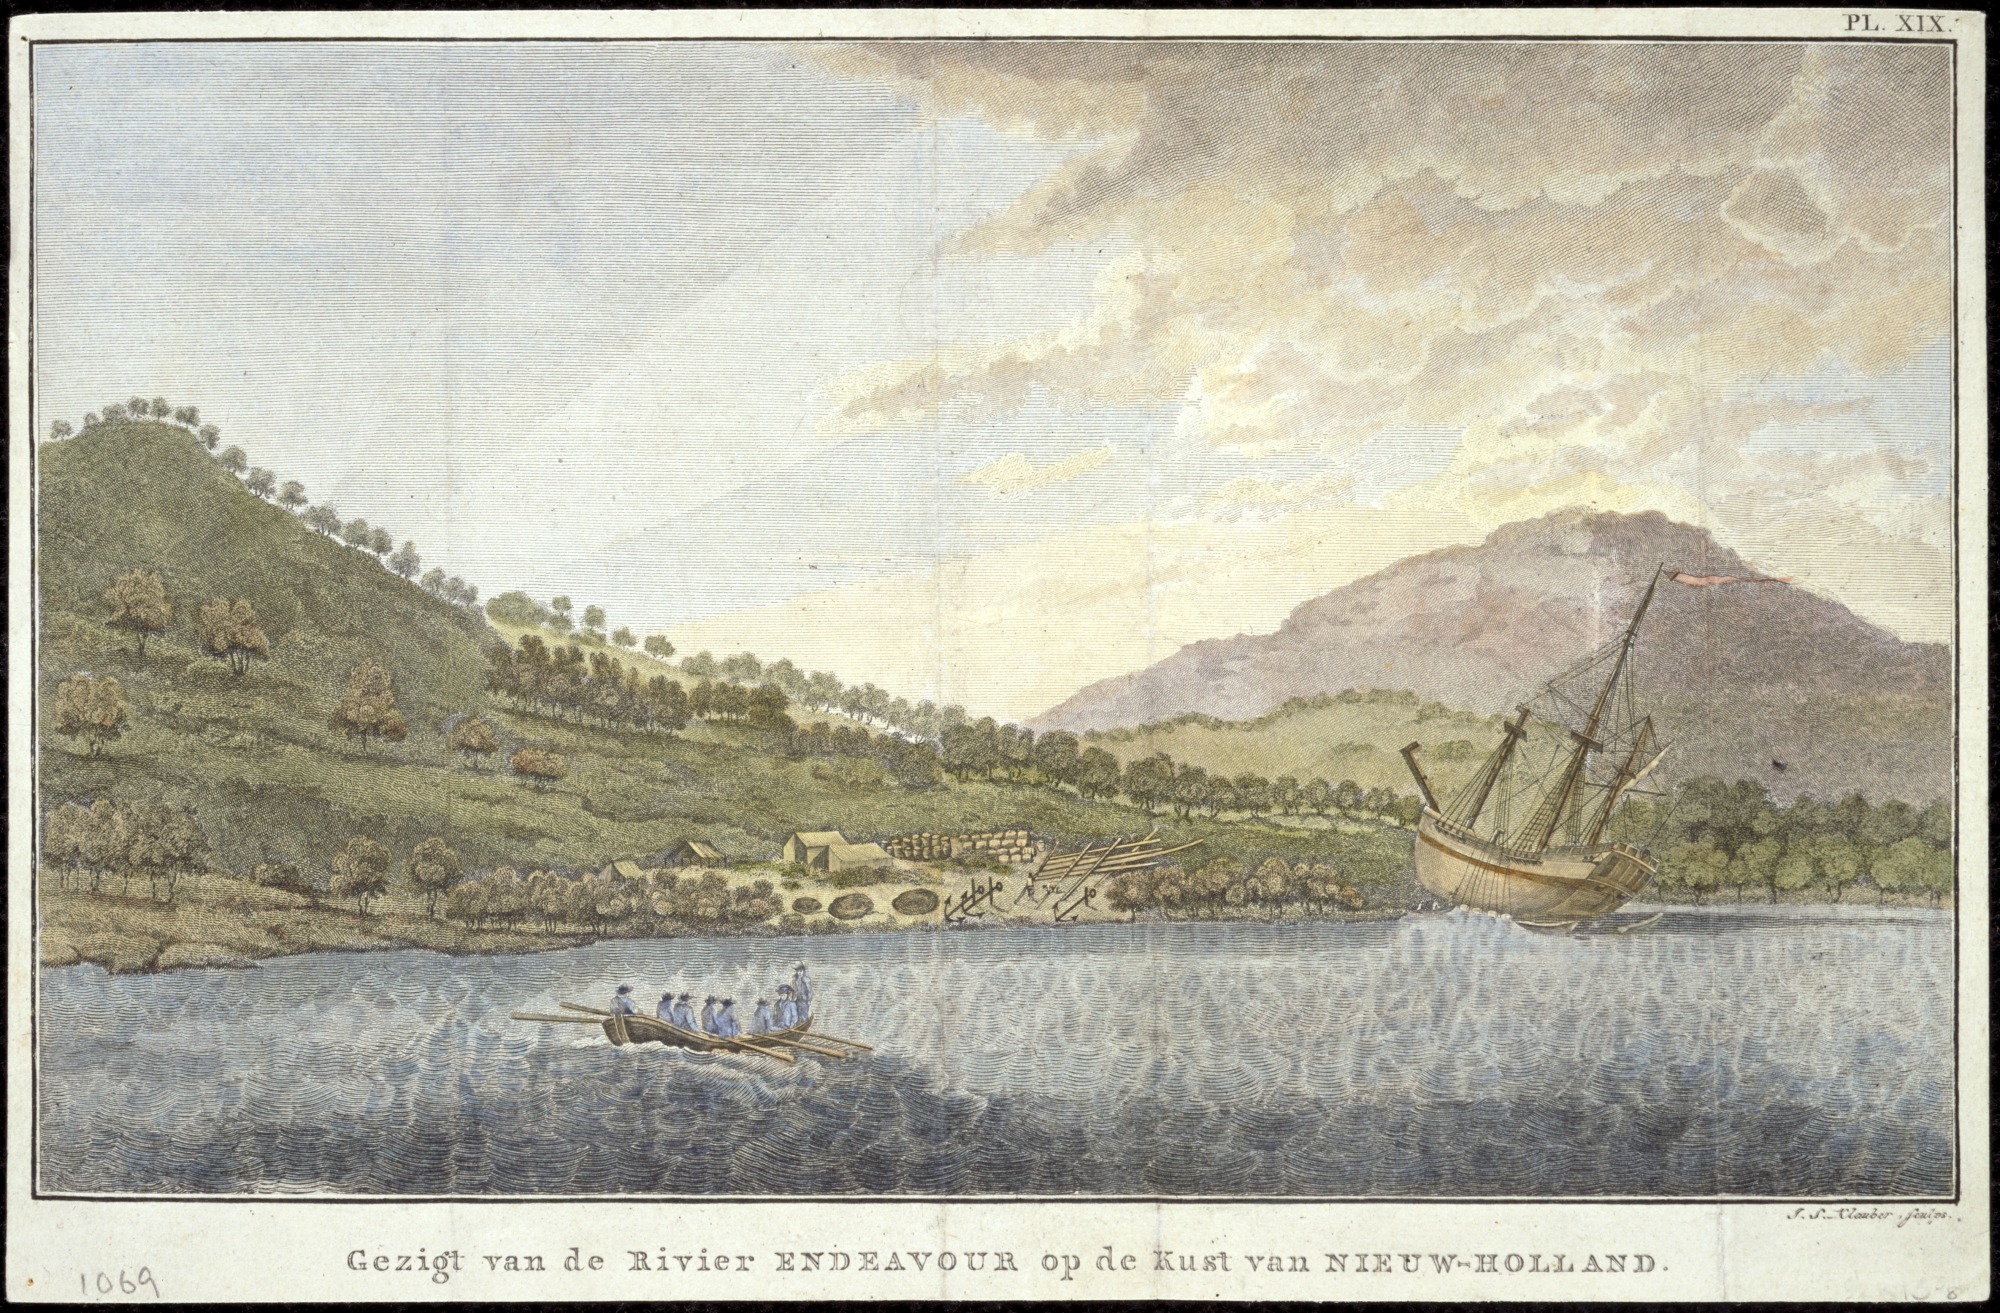 A view of the Endeavour River on the coast of New Holland, by Ignaz Sebastian Klauber, 1795.